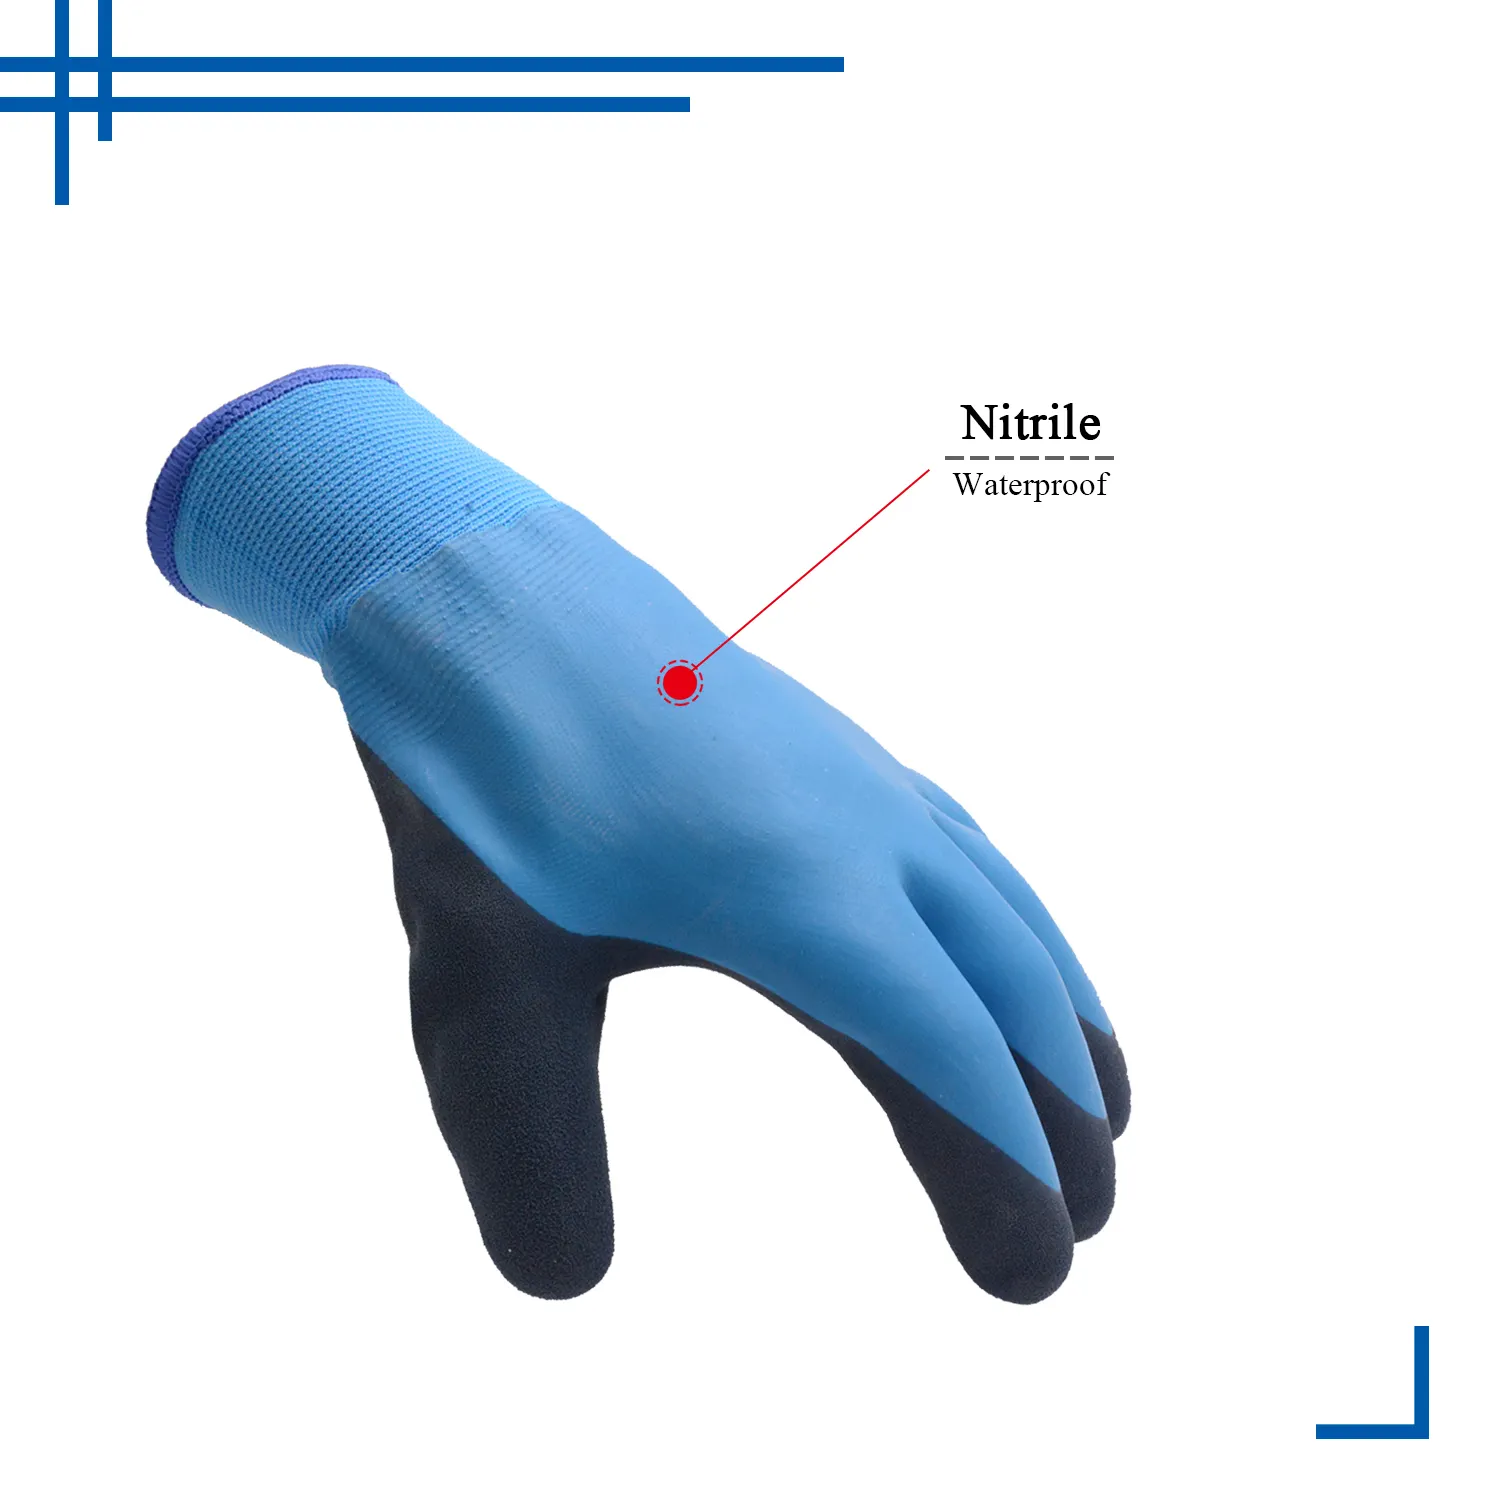 PRISAFETY Great Fitting xxl fully safety cuff water proof double blue nitirle smooth fully dipped work glove